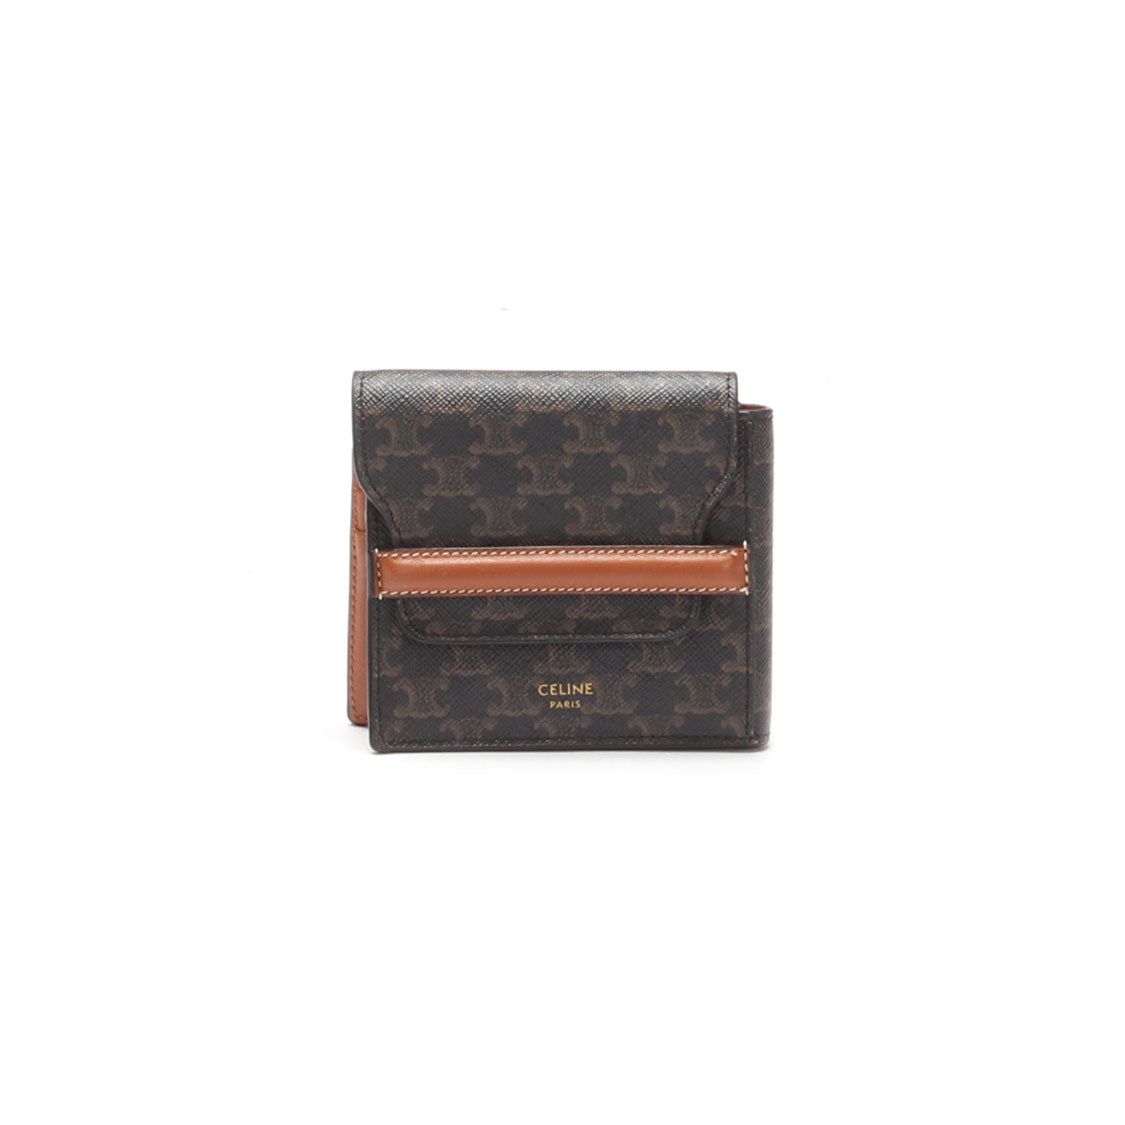 Triomphe Canvas Flap Origami Wallet